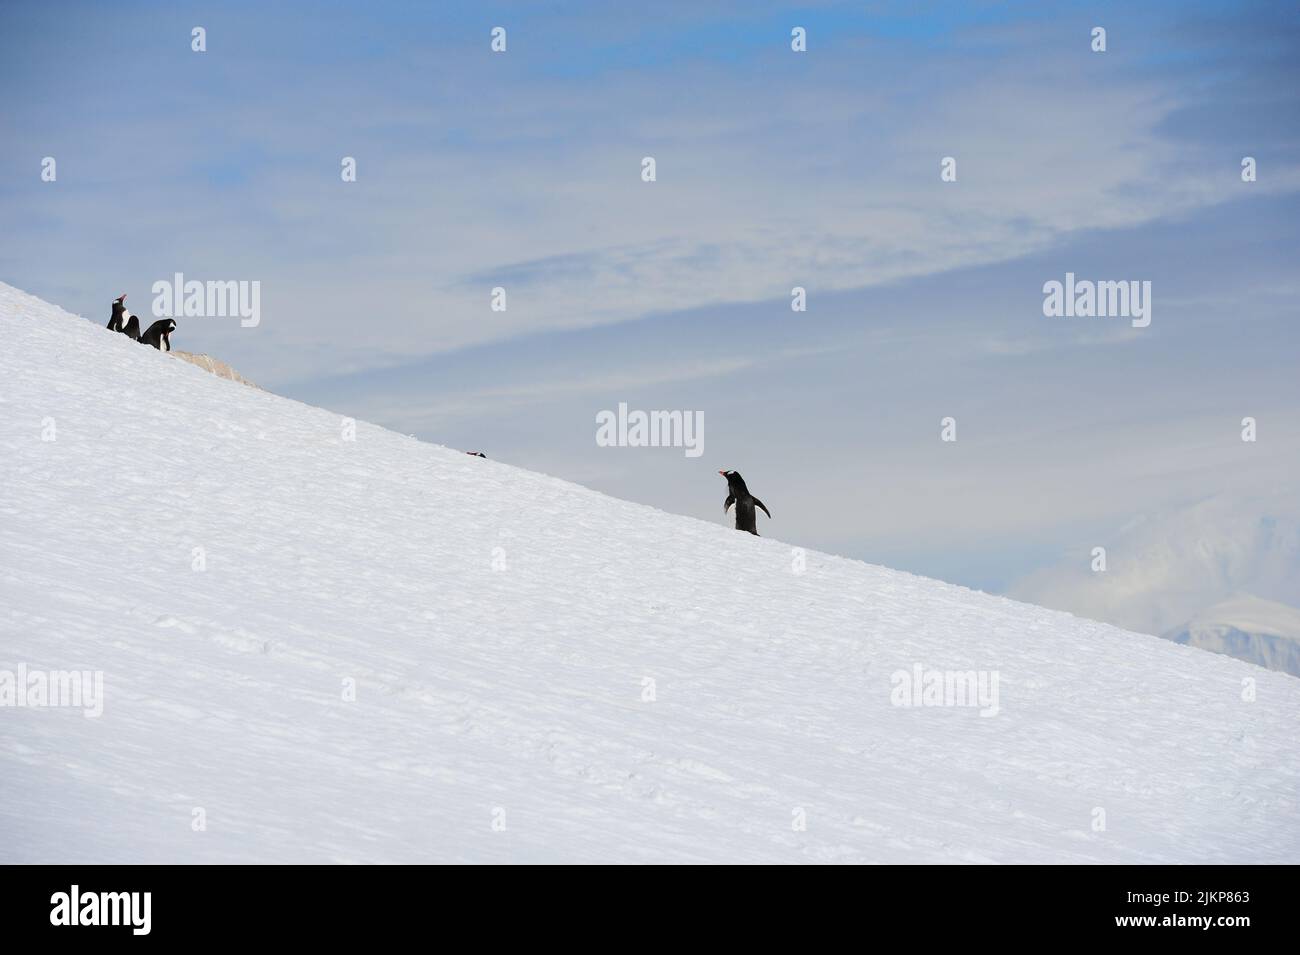 A beautiful shot of gentoo penguin walking uphill in snow trying to join its small colony on a sunny winter day in Antarctica Stock Photo